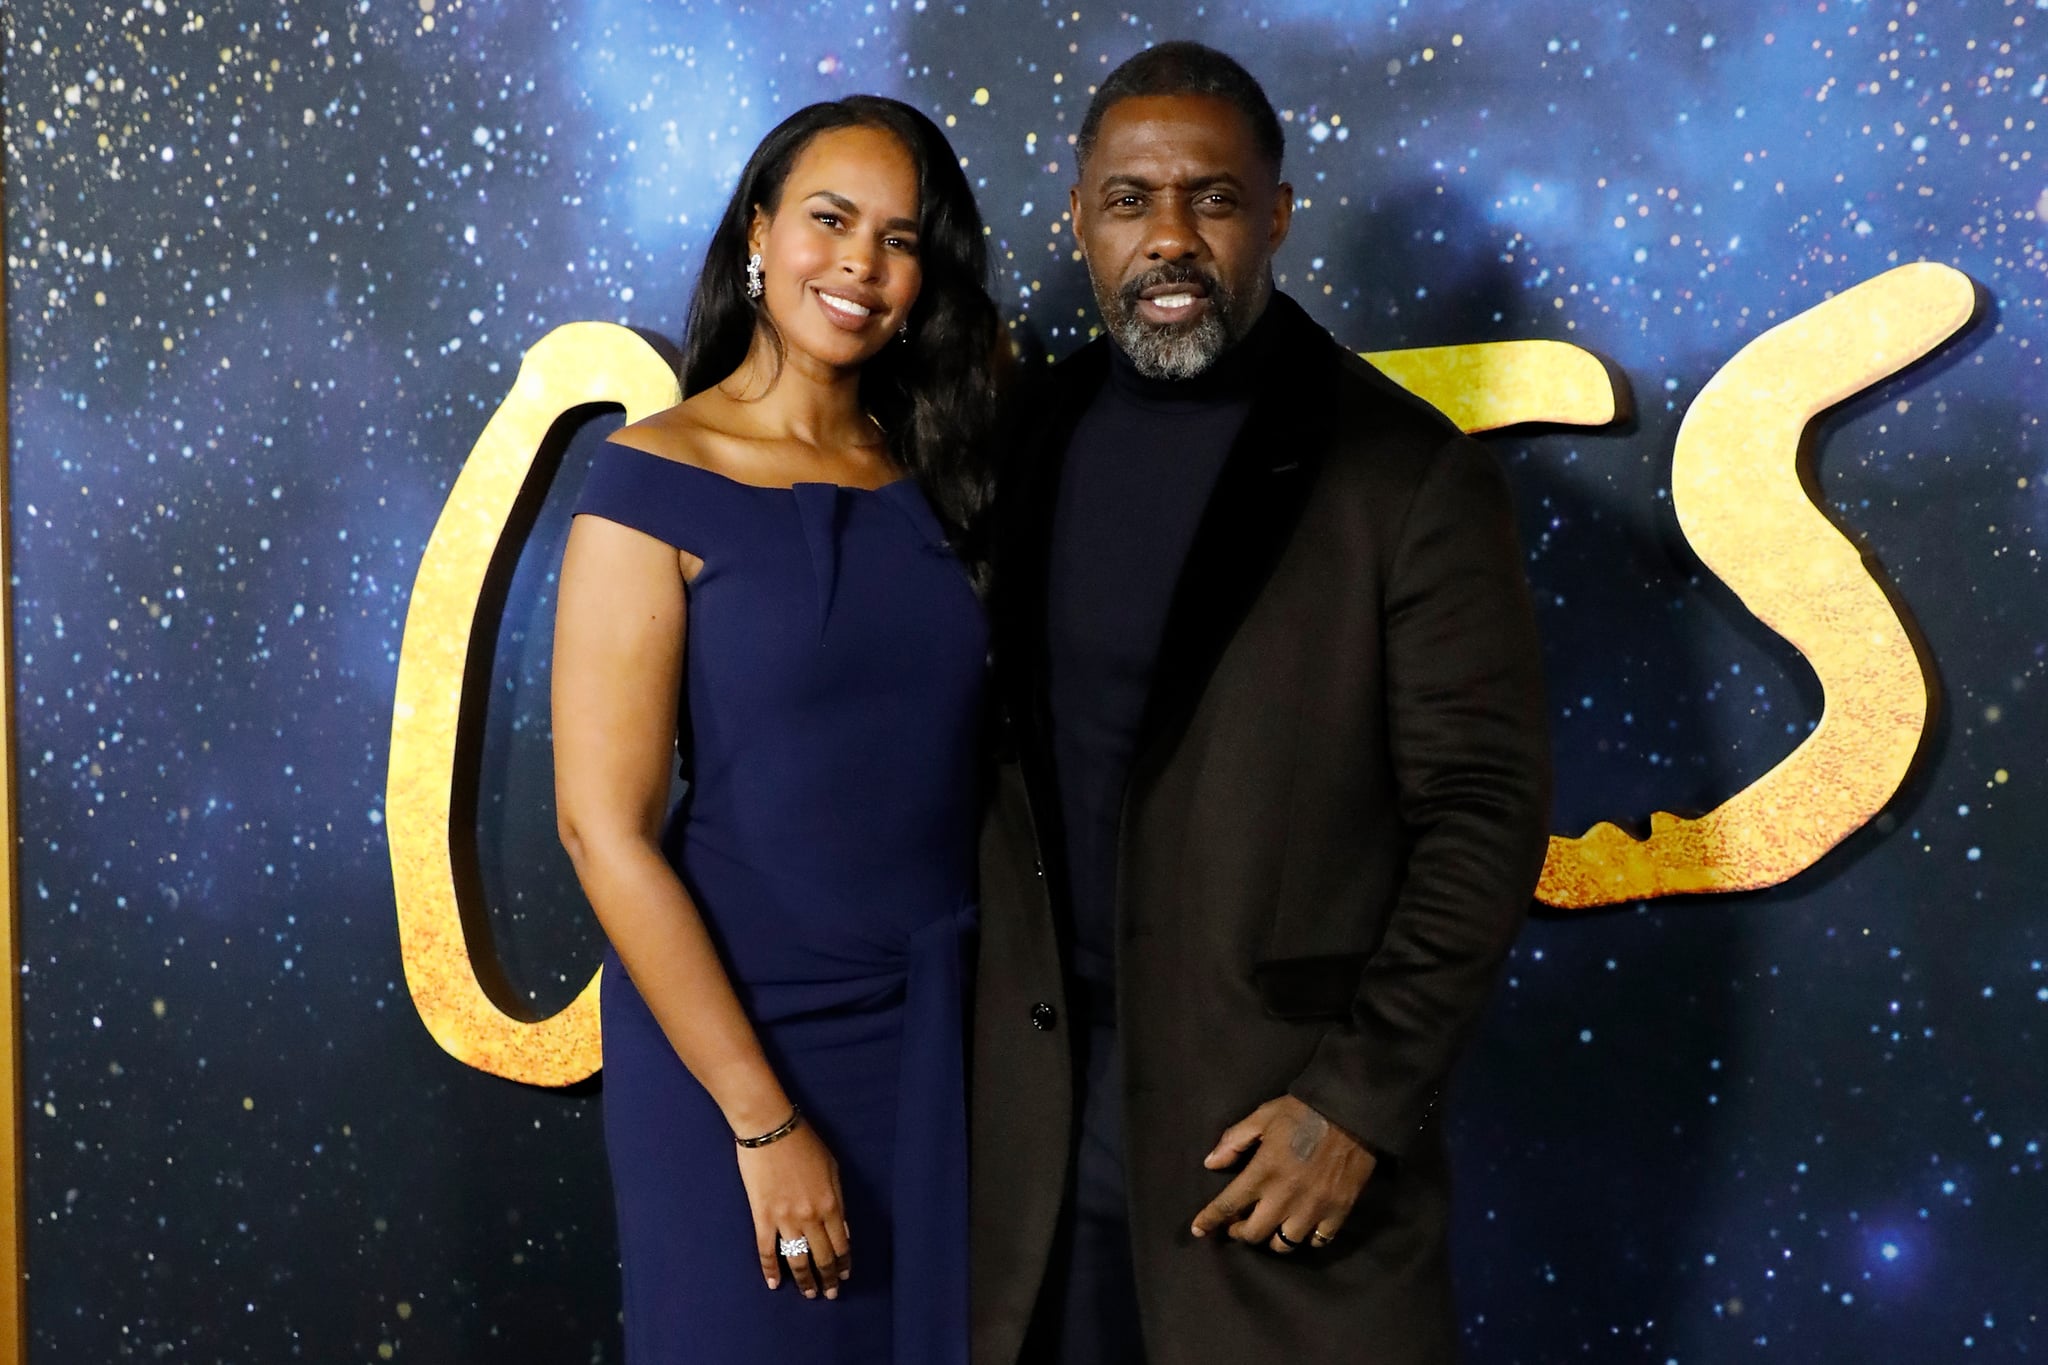 NEW YORK, NEW YORK - DECEMBER 16: Sabrina Dhowre and Idris Elba attend the world premiere of